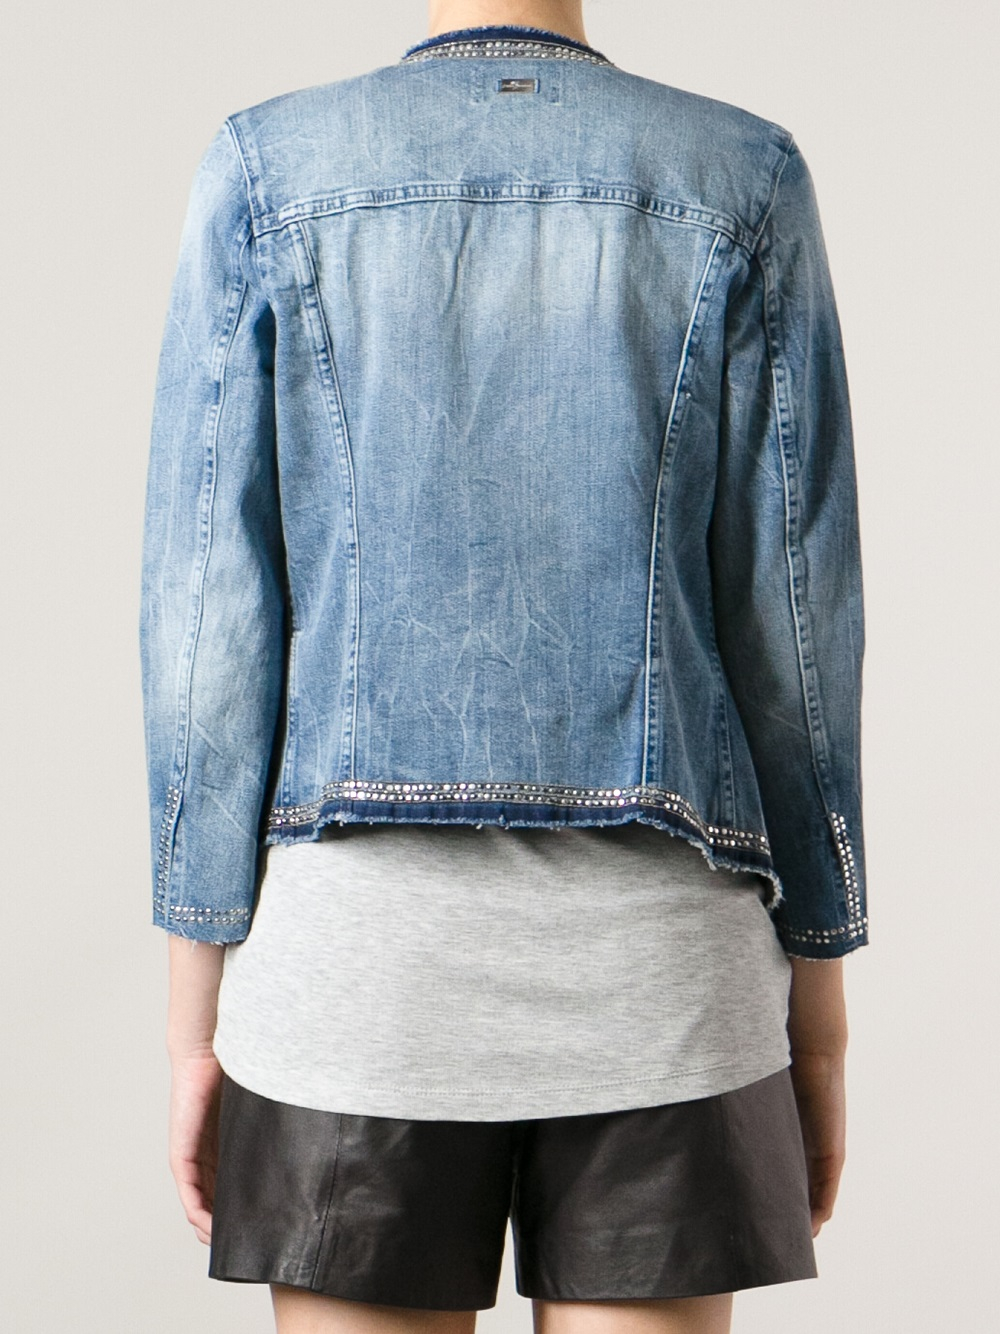 7 For All Mankind Studded Collarless Denim Jacket in Blue - Lyst